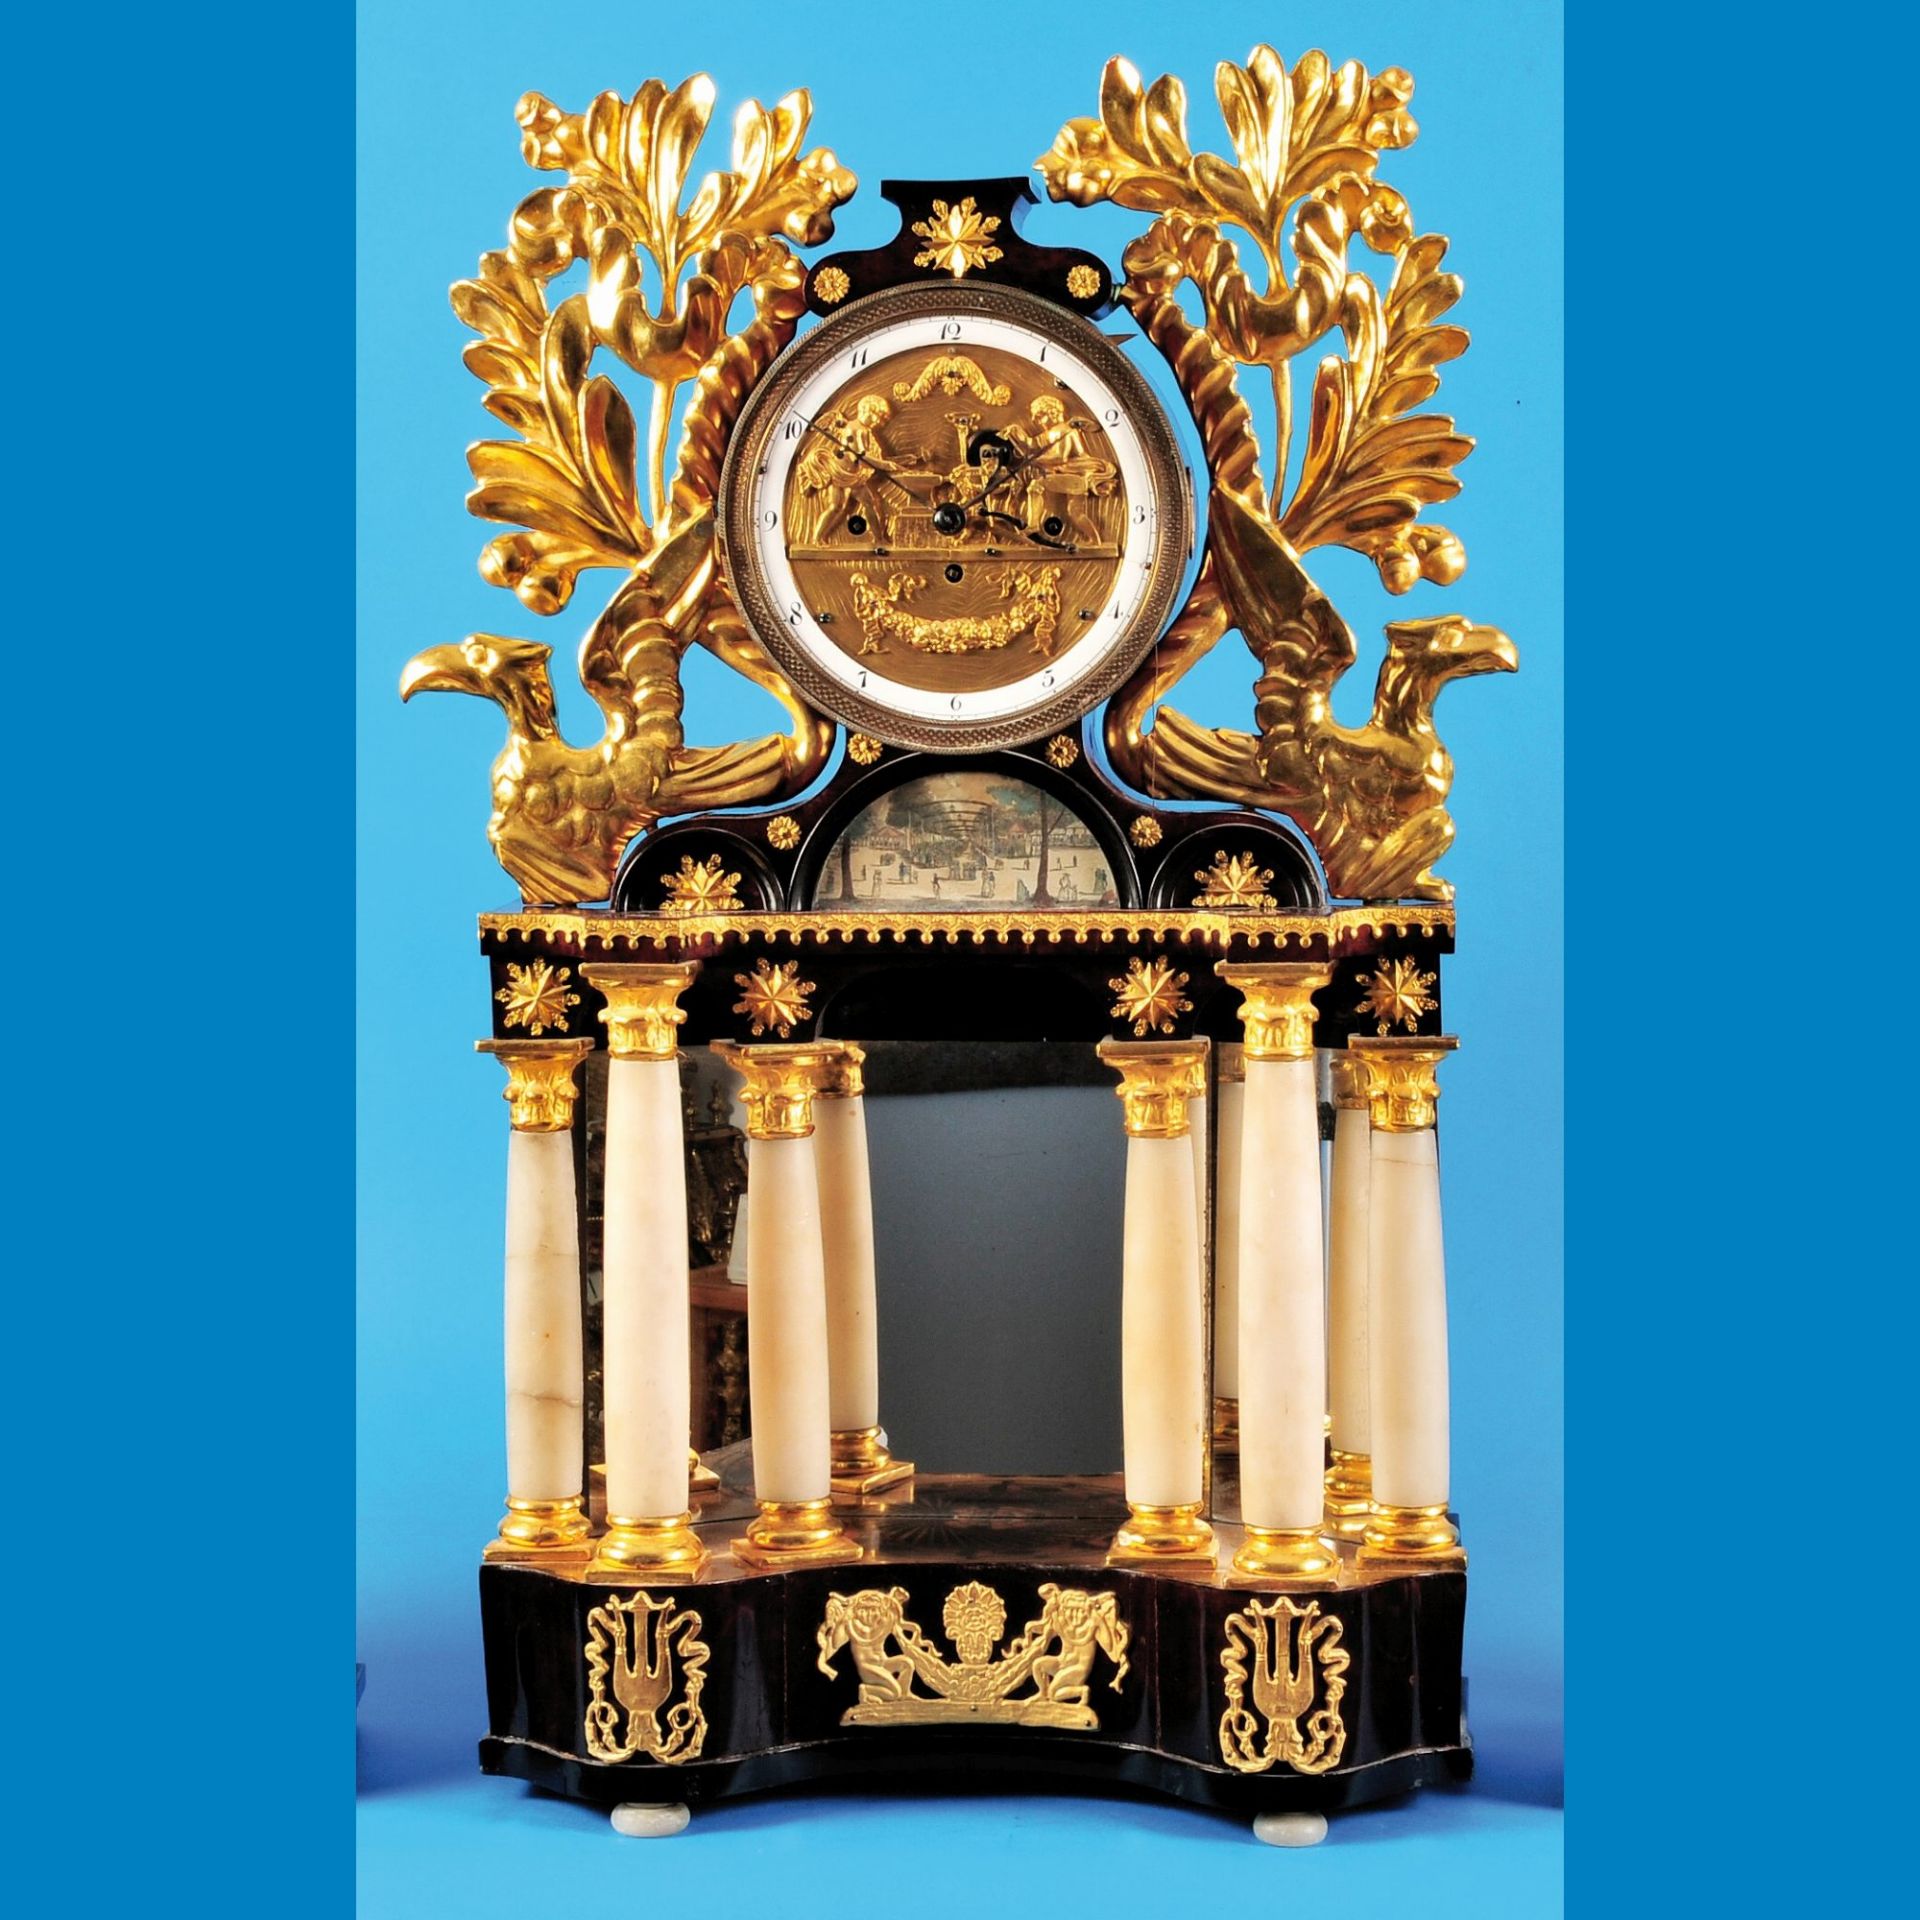 Austrian master clock with Viennese 4/4- strike and 2 figure automatons with smith and grinder